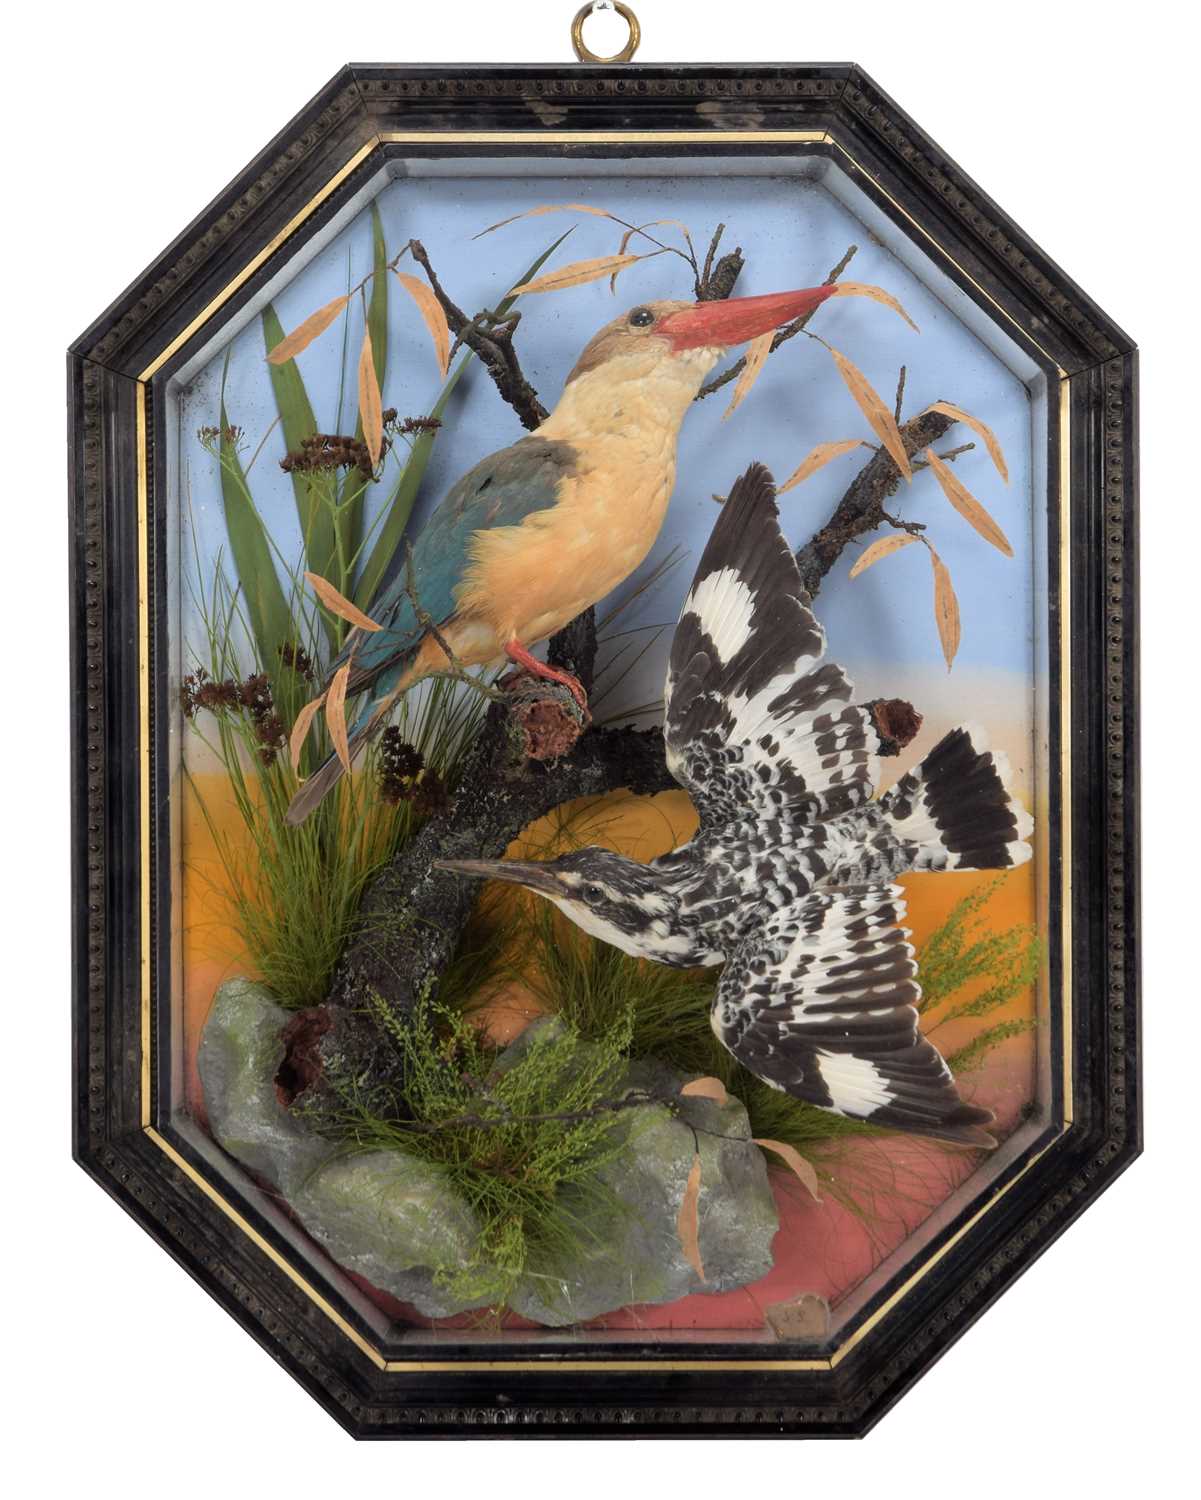 Taxidermy: A Wall Cased Stork-Billed Kingfisher & Pied Kingfisher, circa early 20th century, by